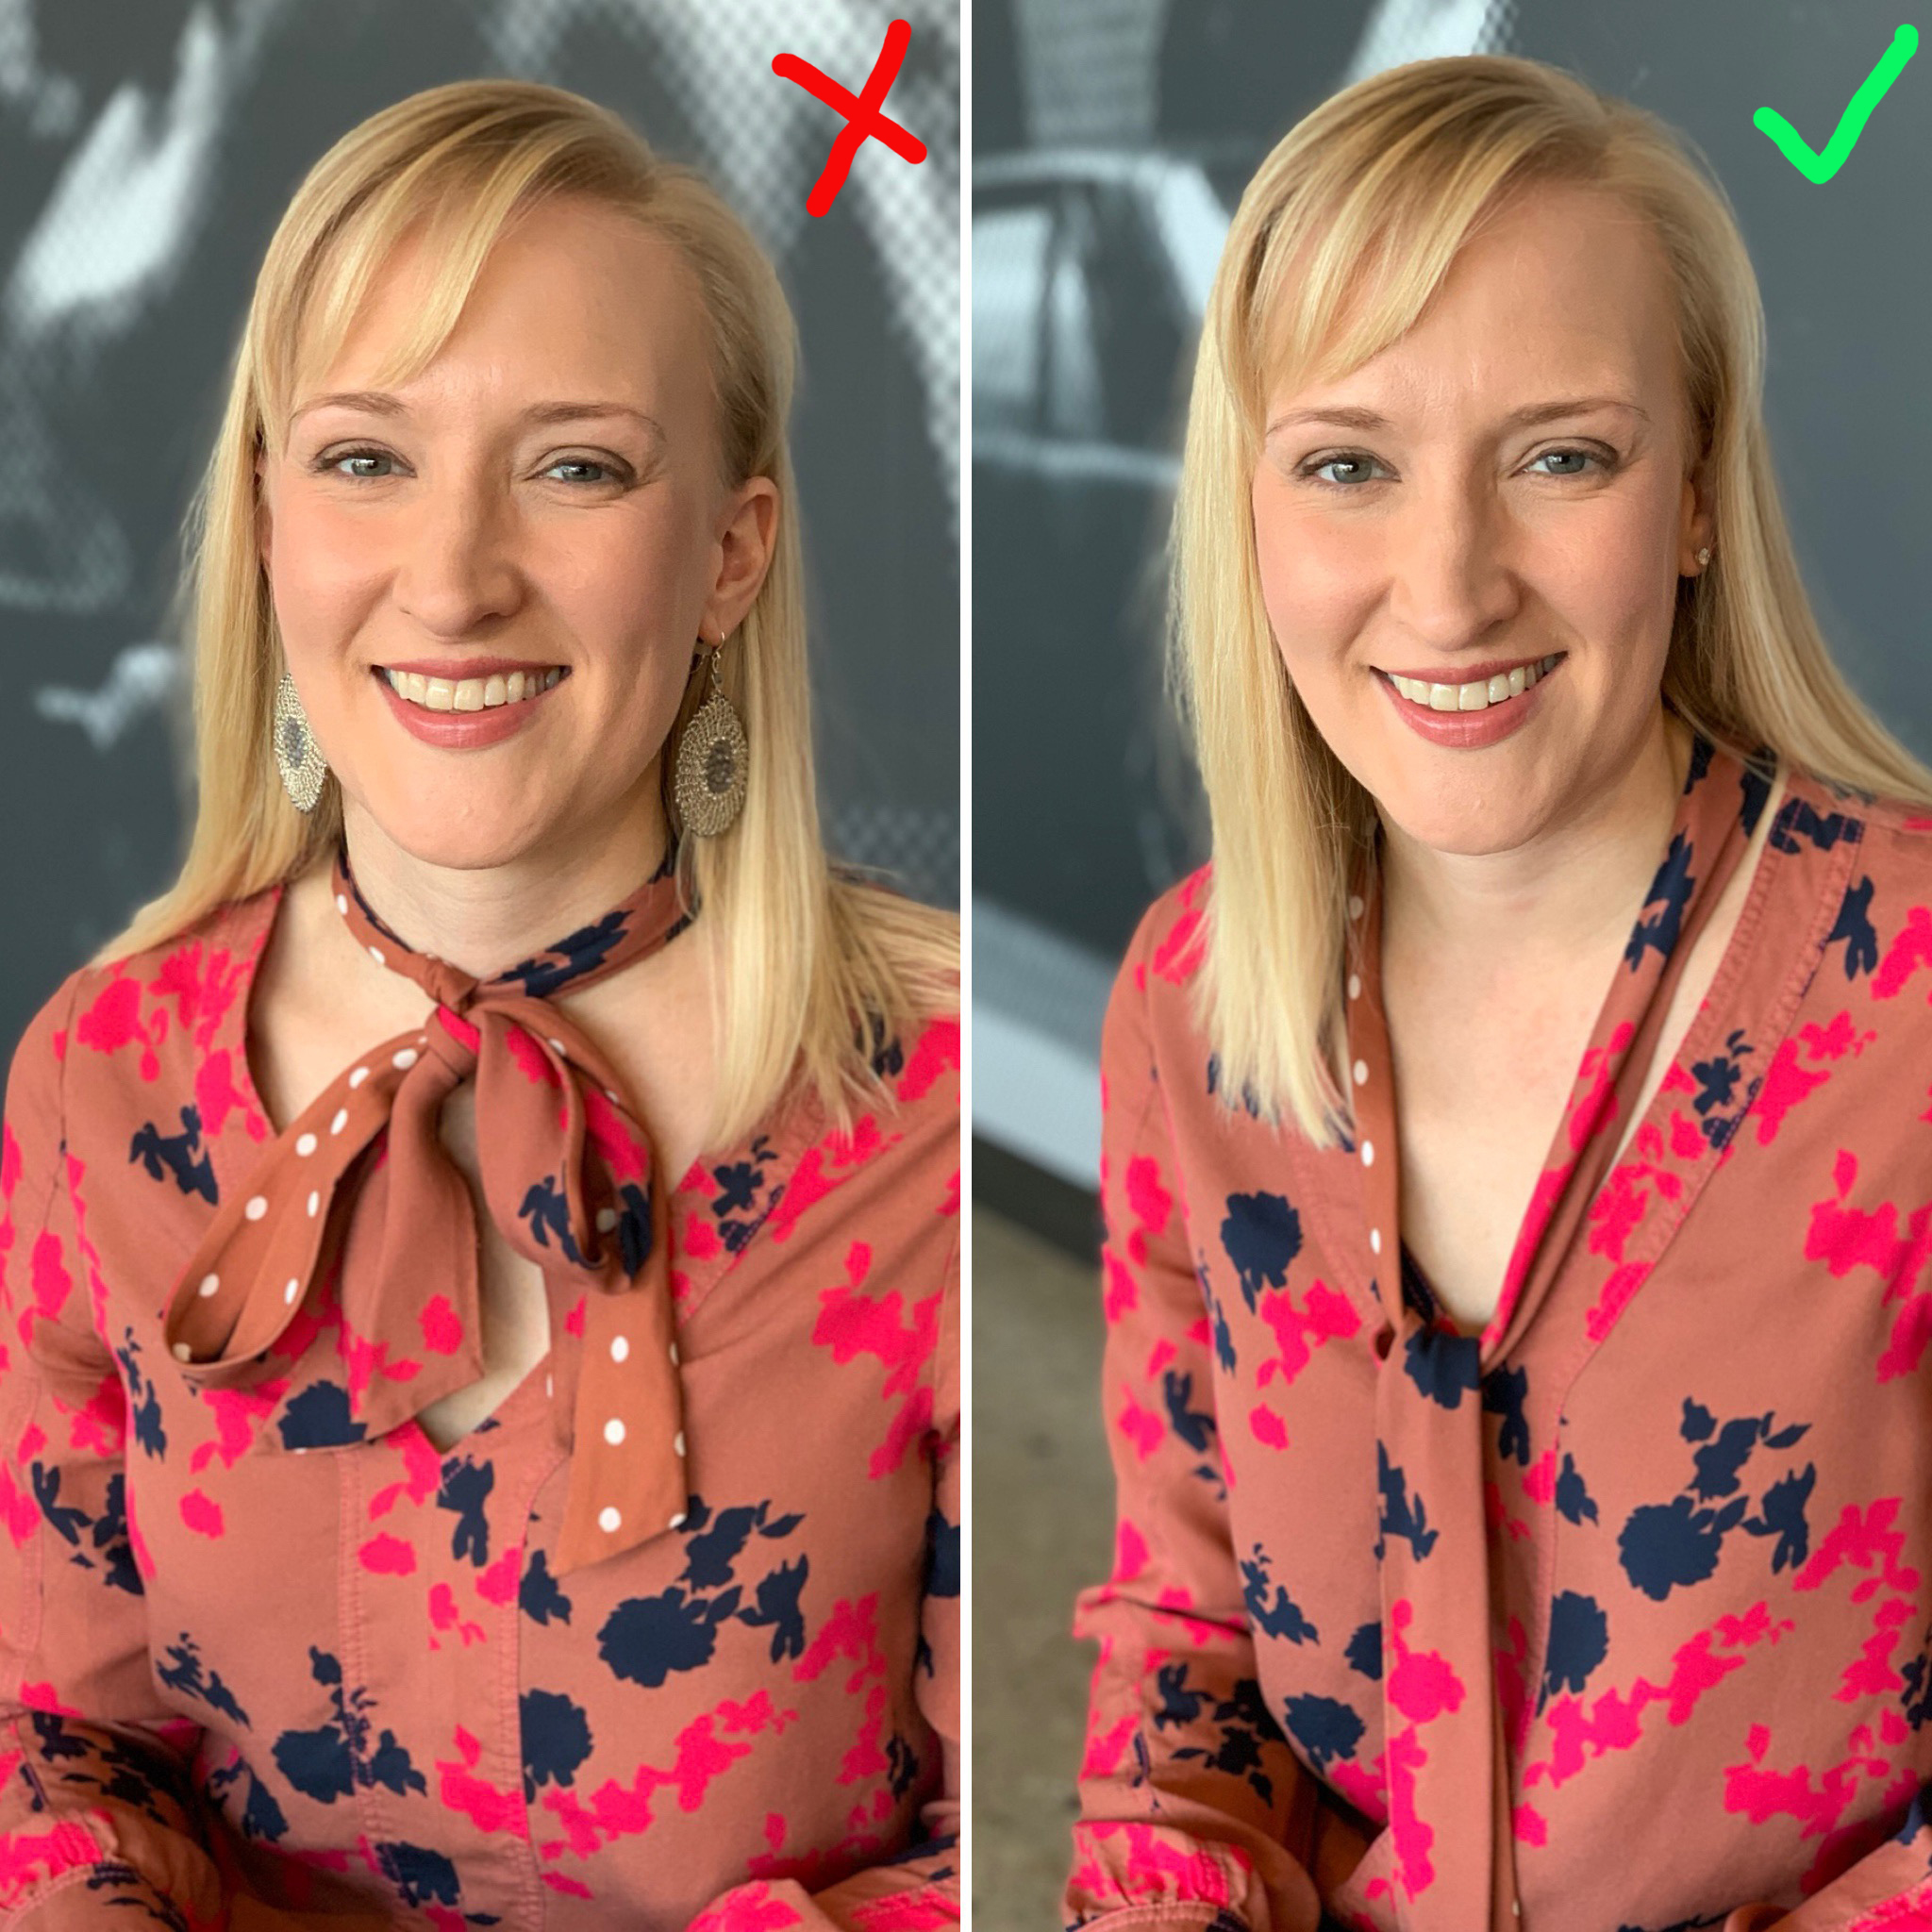 What to wear for professional headshots, avoid things that tie at the neck